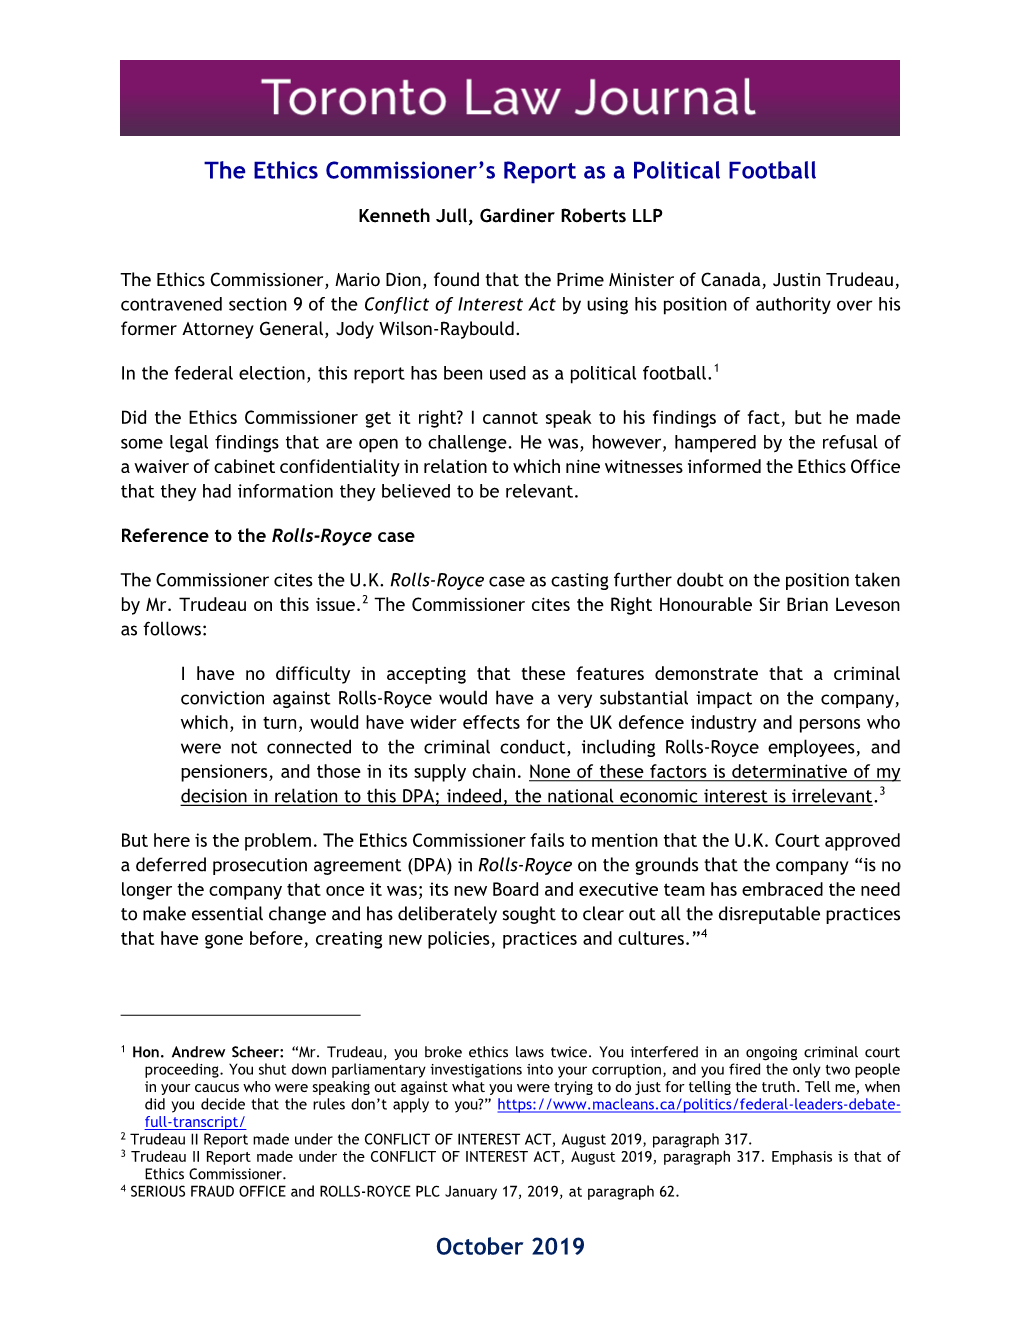 The Ethics Commissioner's Report As a Political Football